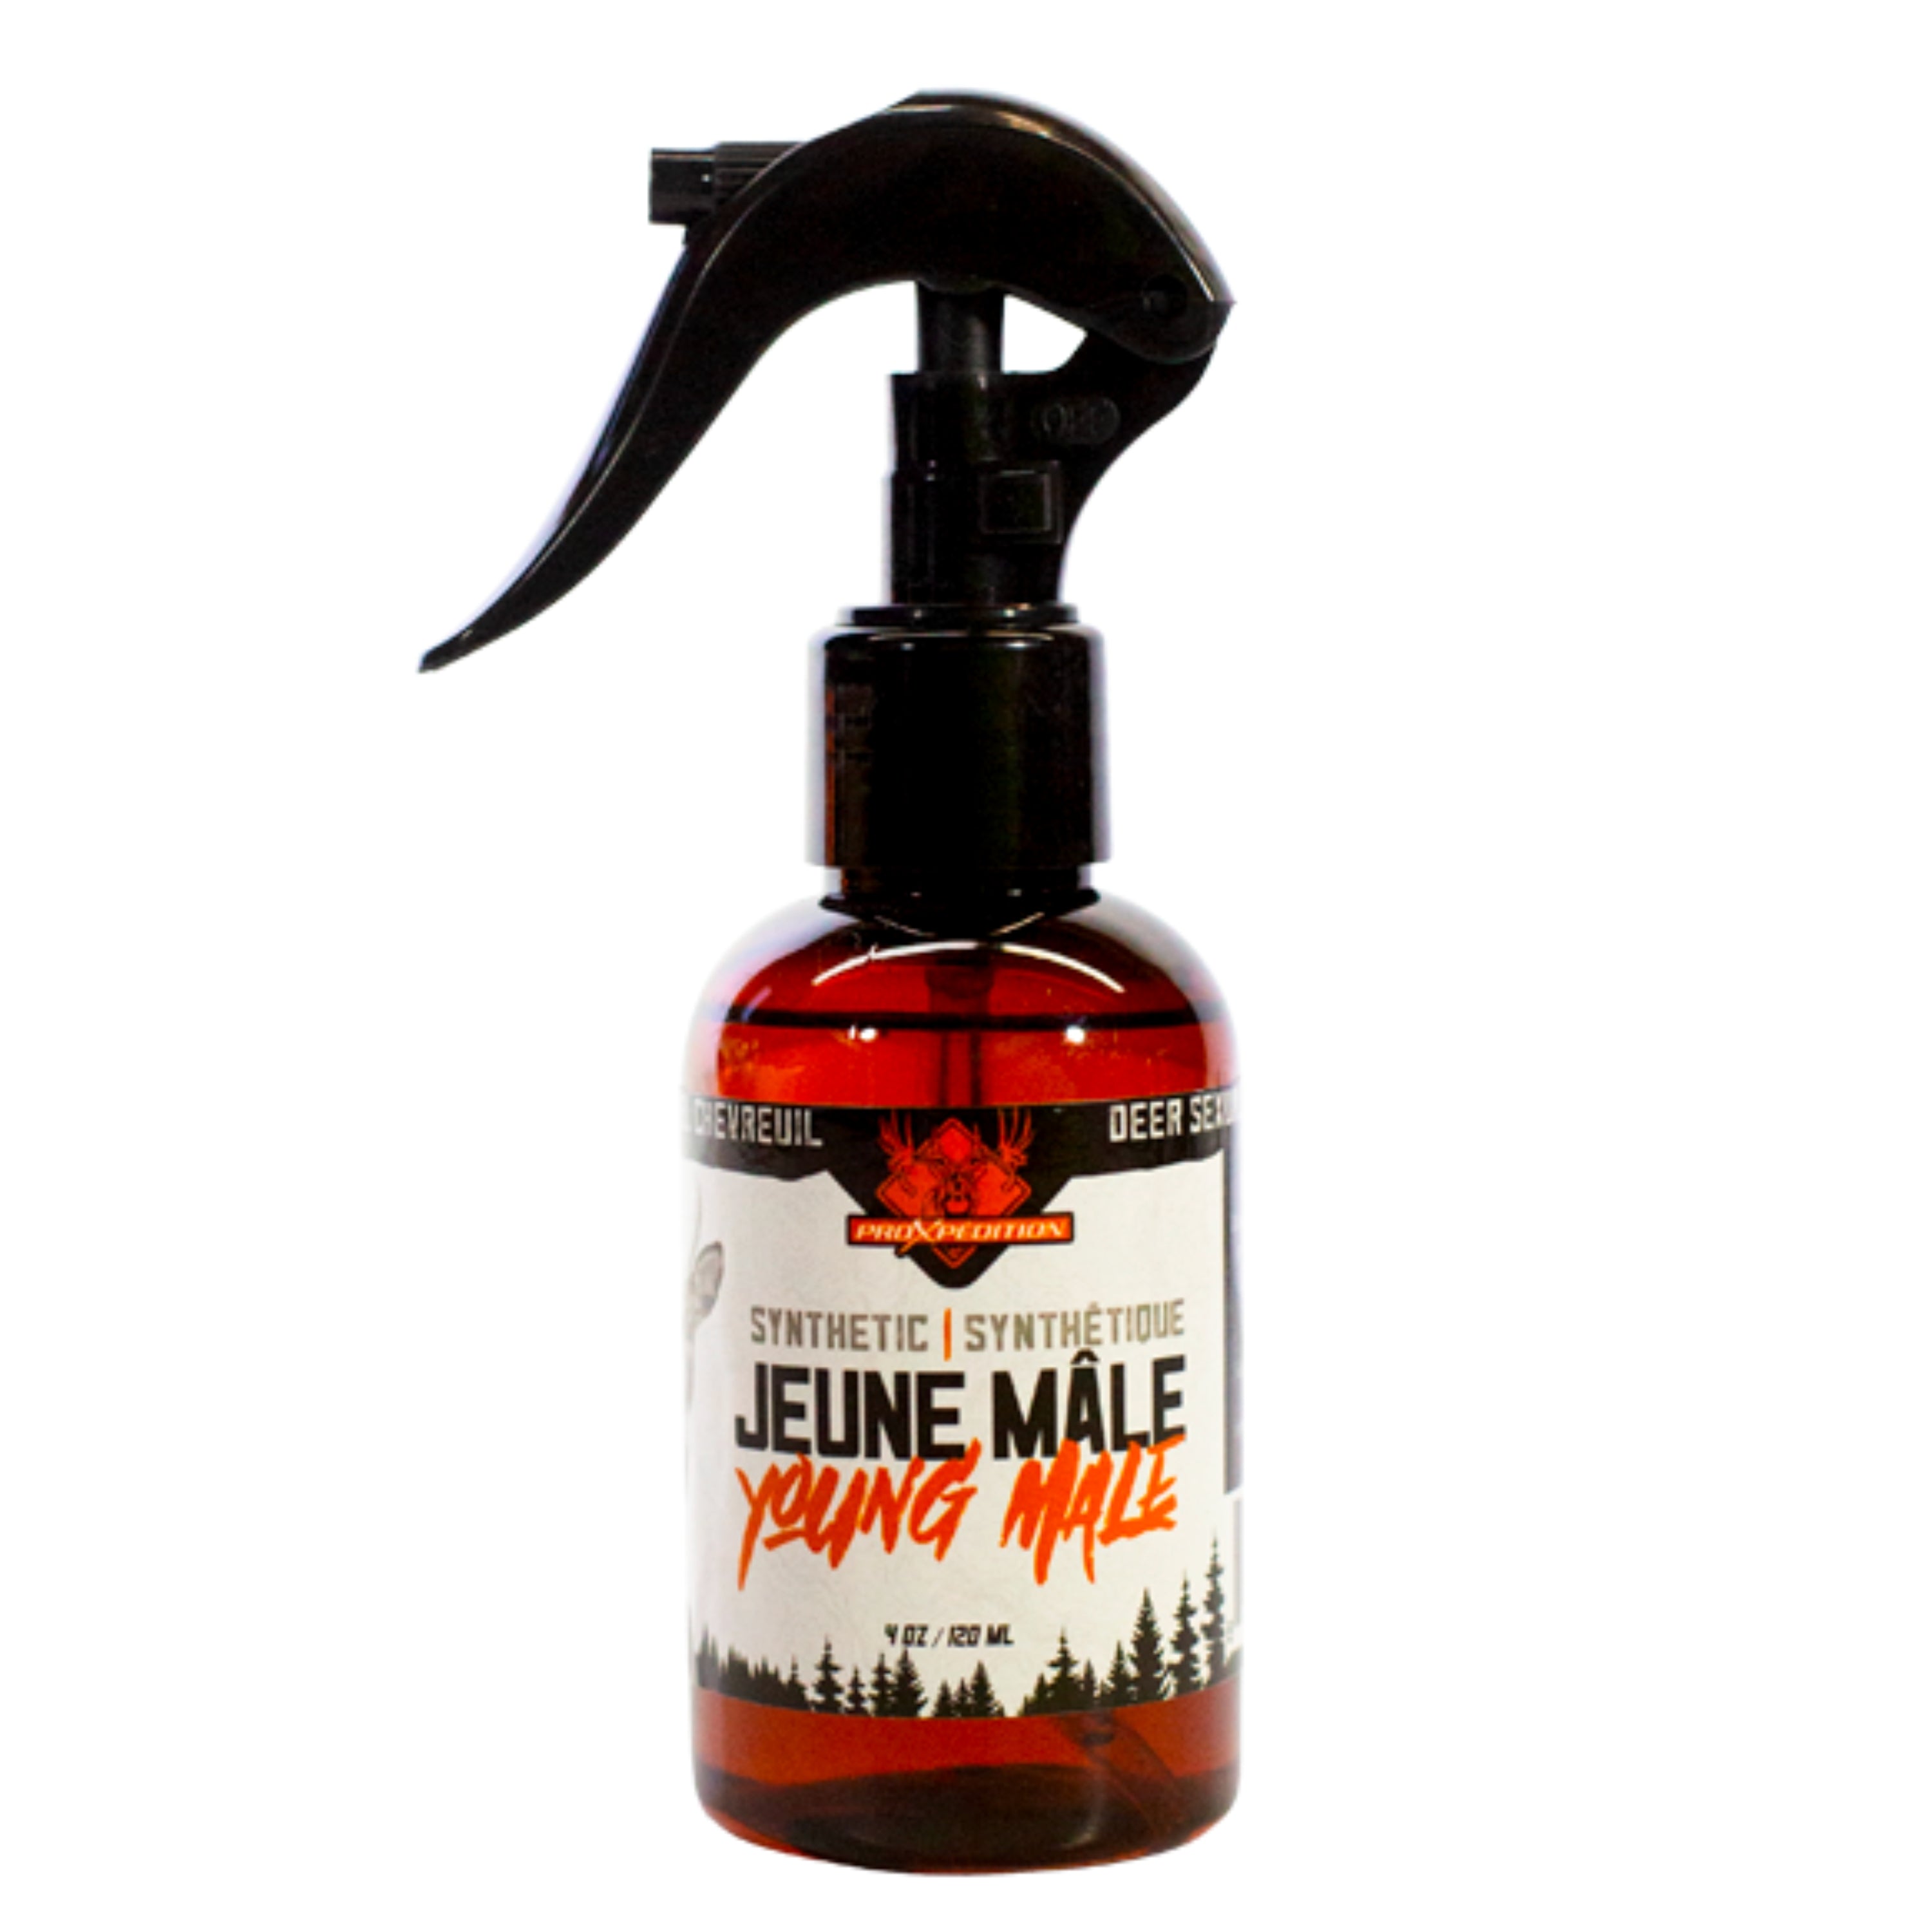 "Young male" Synthetic sexual lure - Deer